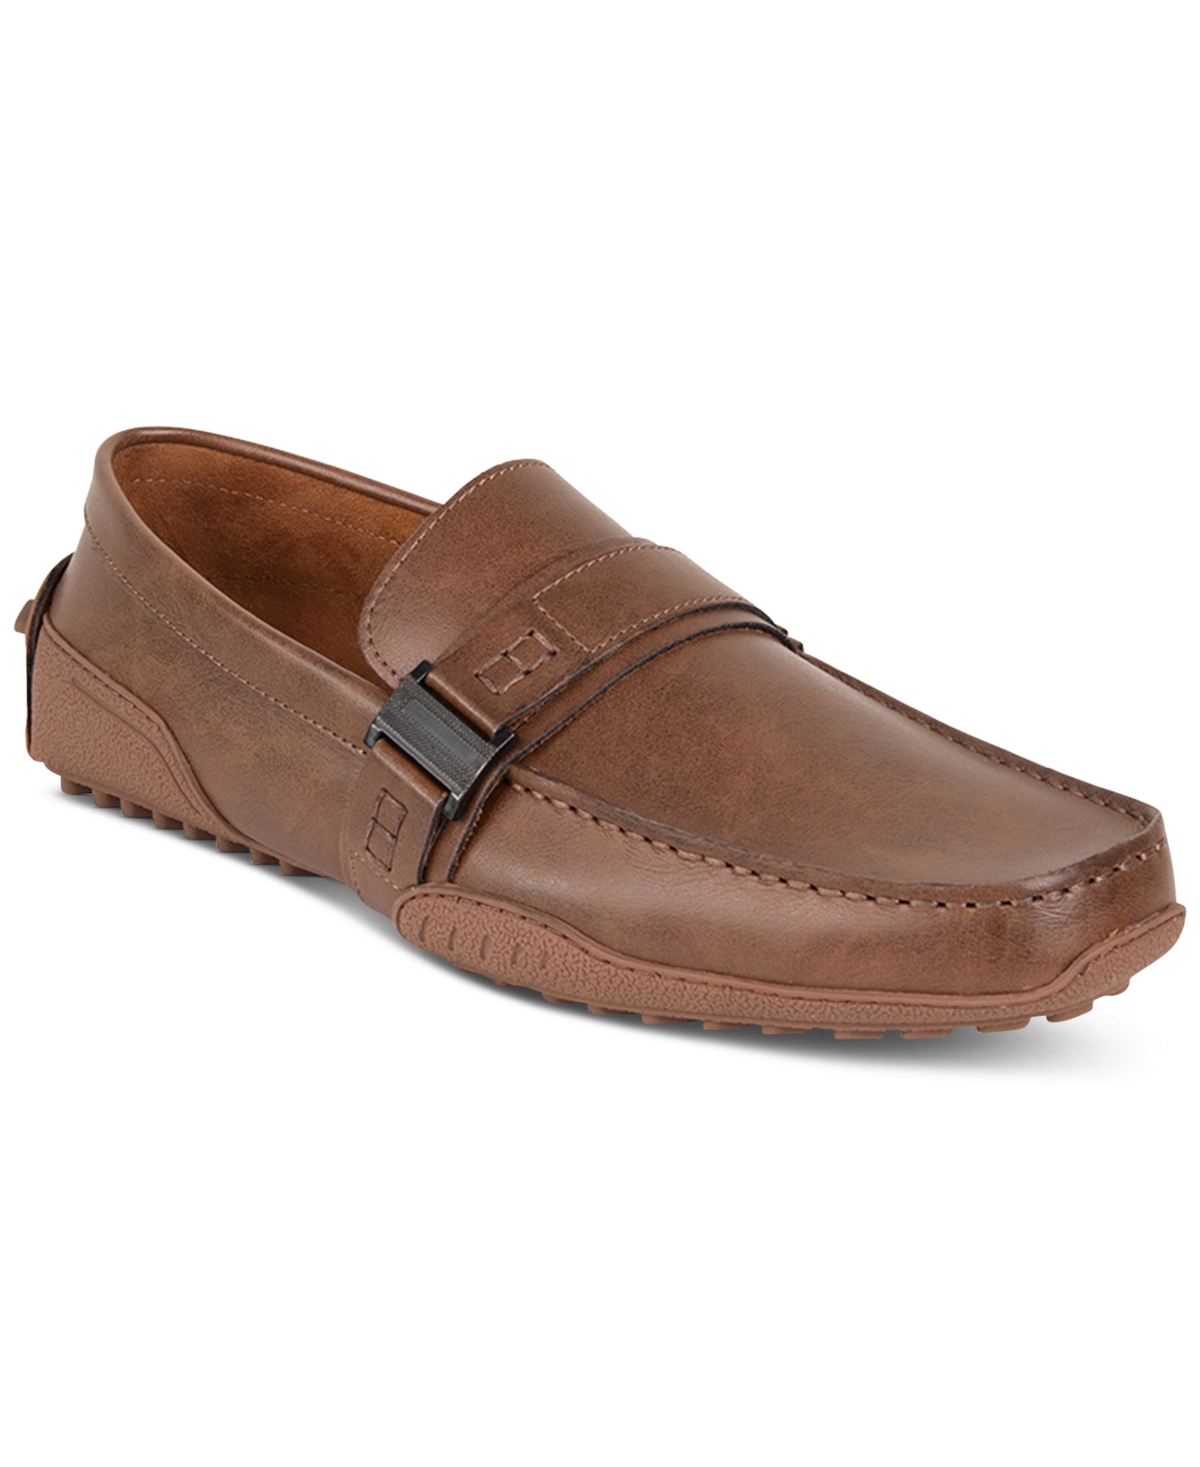 Kenneth Cole Unlisted Men's Wister Belt Slip On Driving Loafers - Cognac